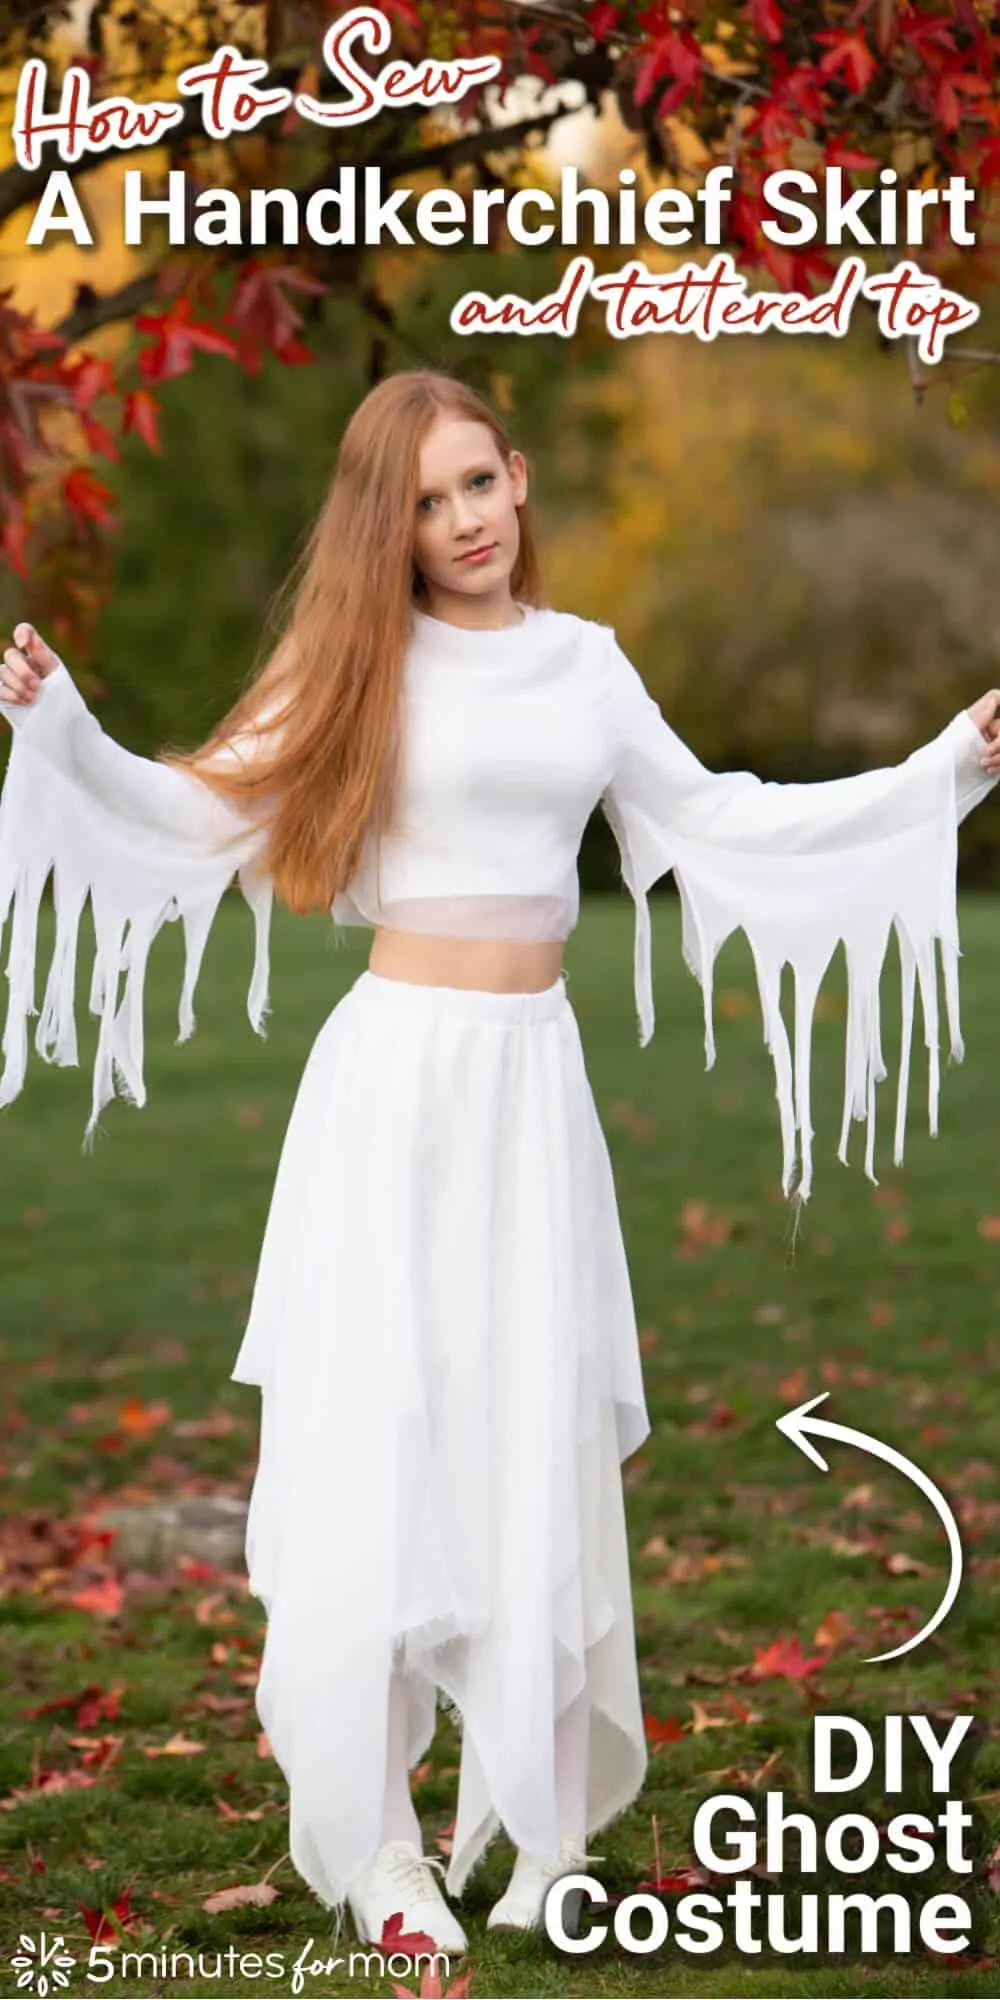 How To Make A Handkerchief Skirt And Top – Ghost Costume Tutorial